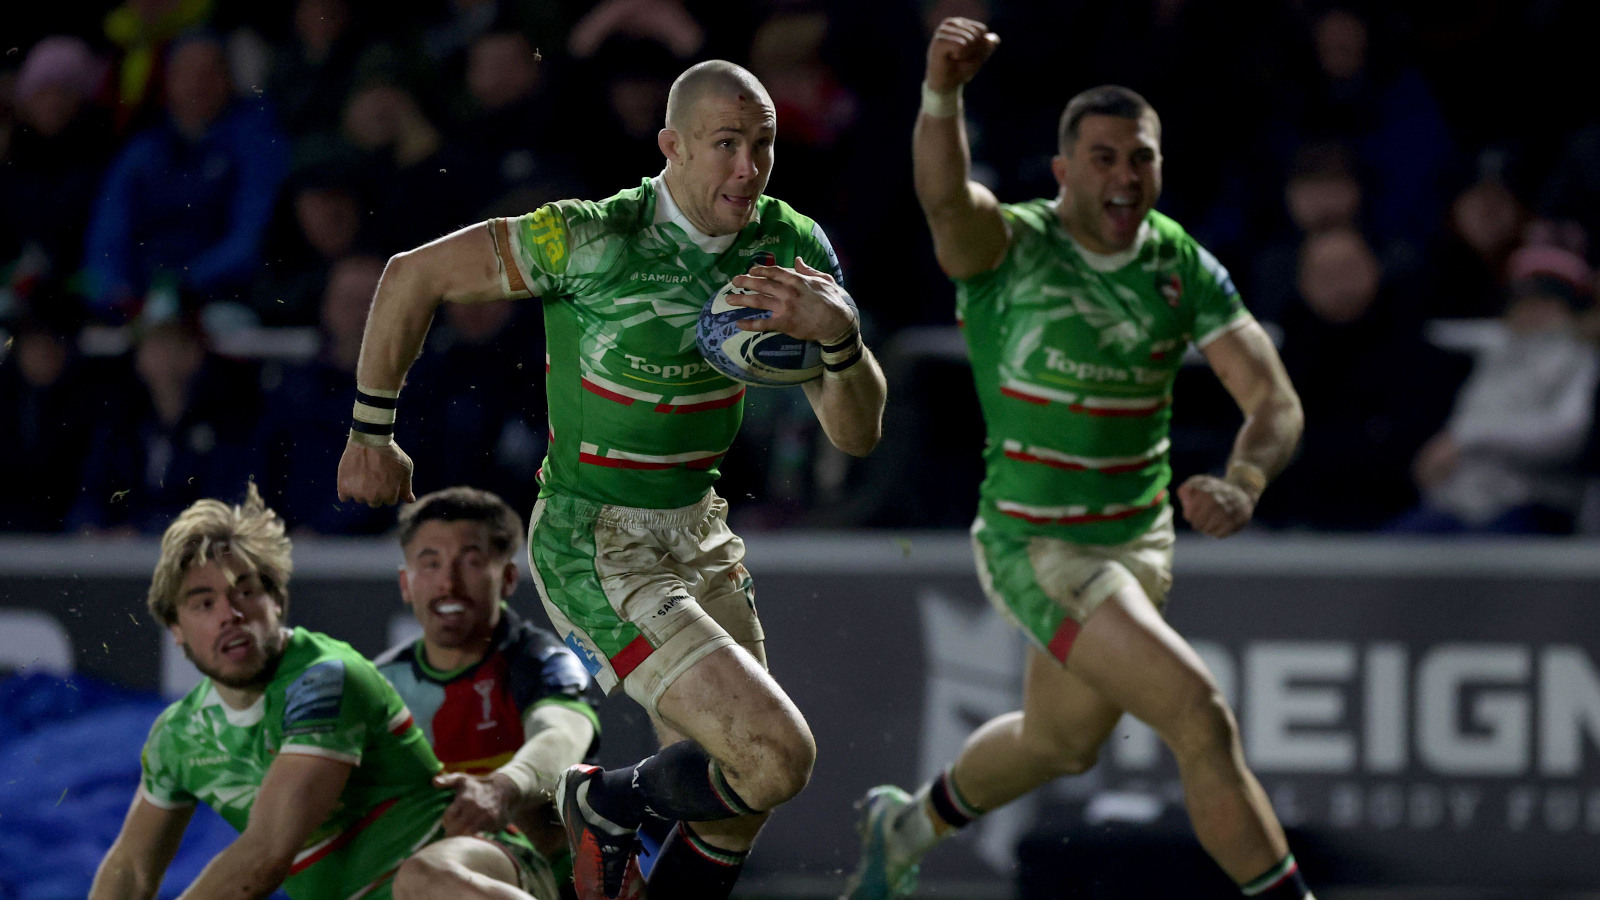 mike brown comes back to haunt harlequins as leicester tigers claim dramatic win